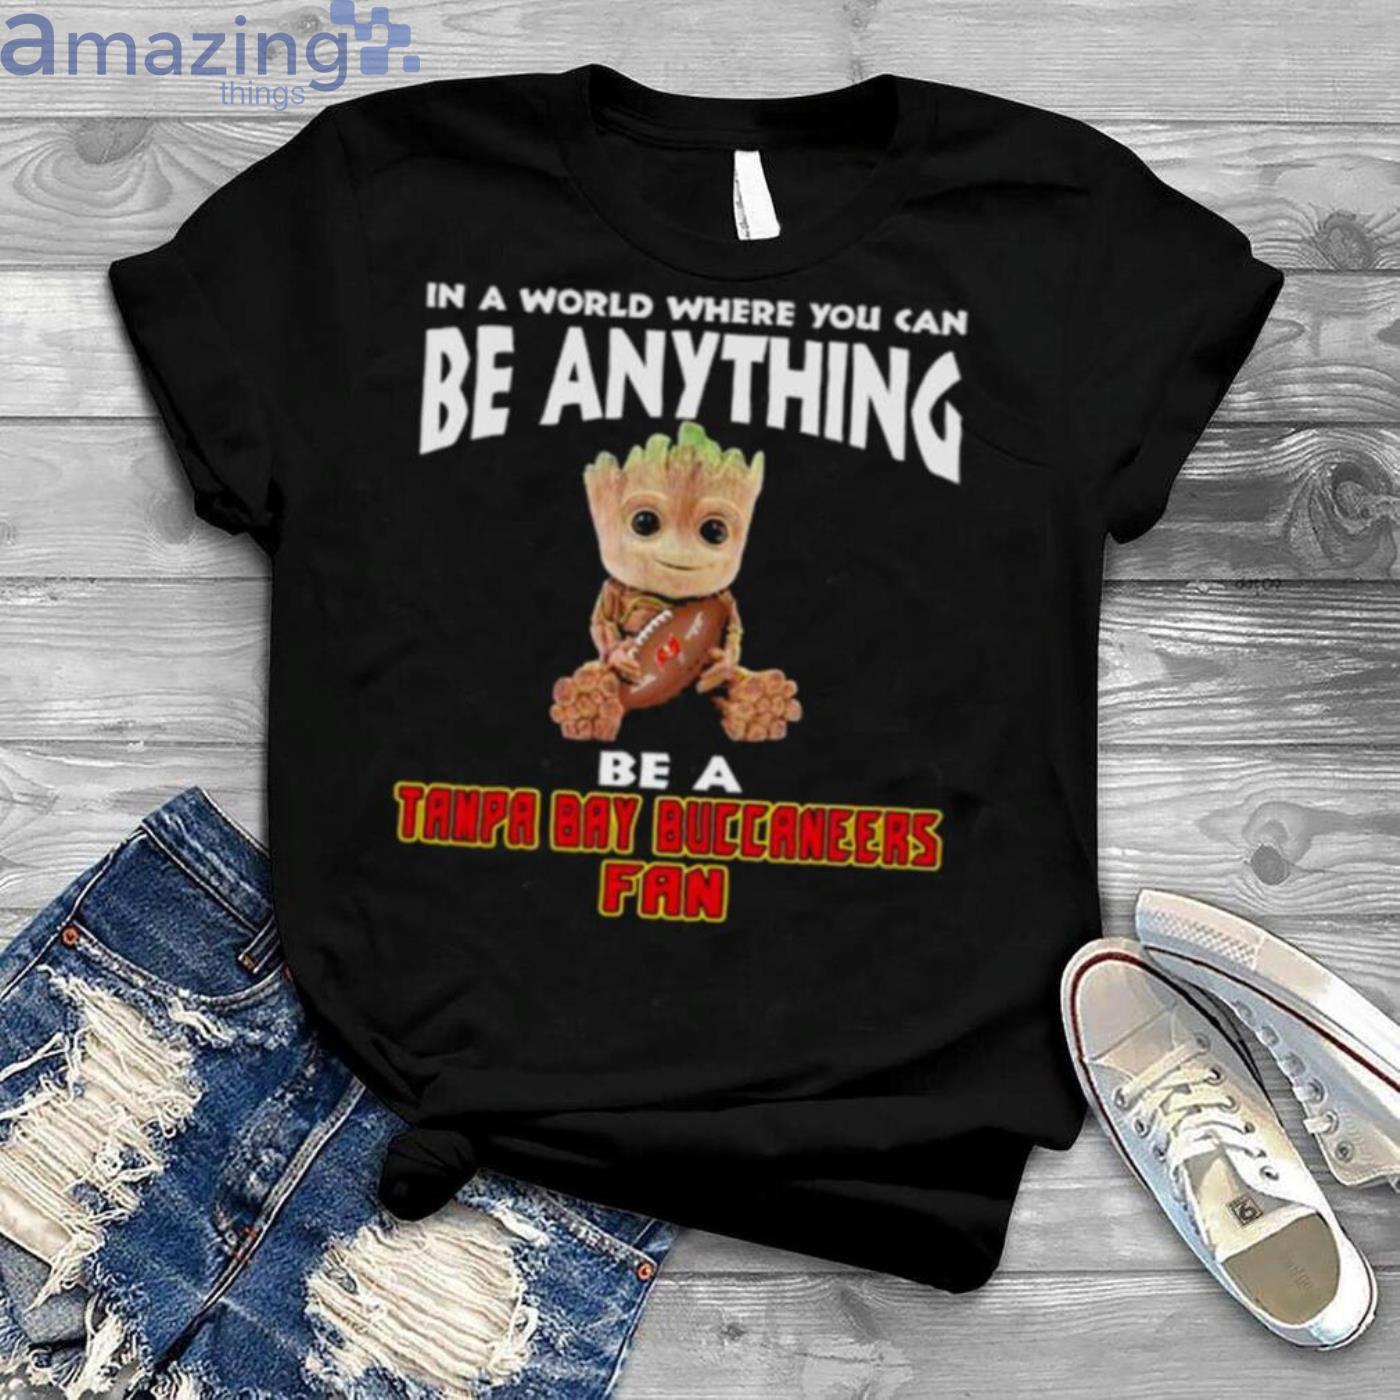 In A World Where You Can Be Anything Be A Tampa Bay Buccaneers Fan Baby Groot Shirt Product Photo 1